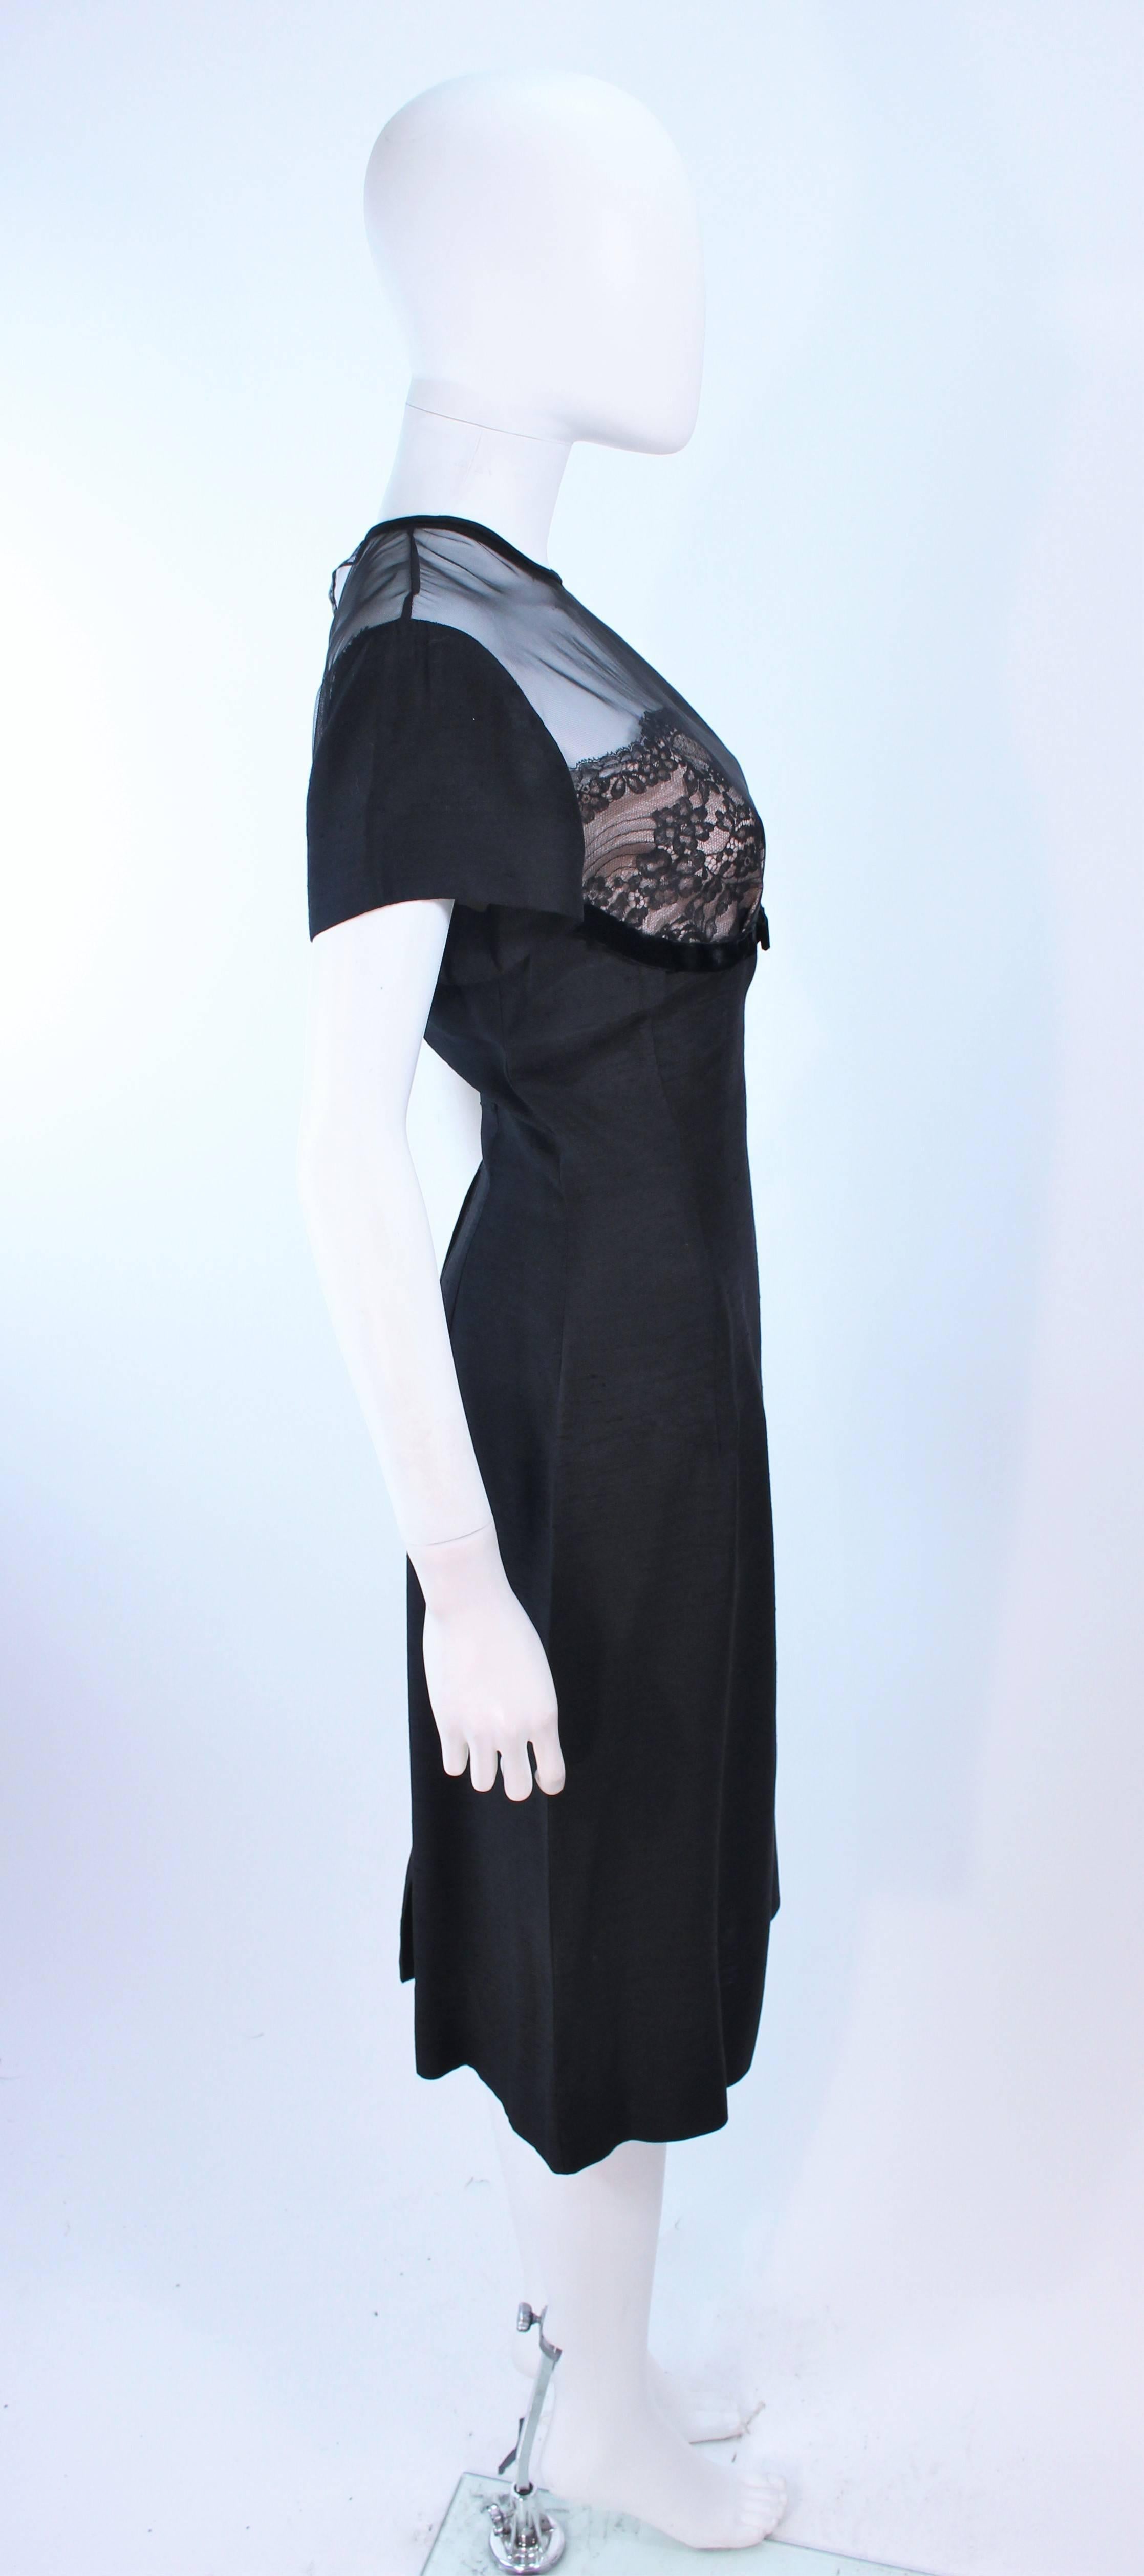 J. HARLAN Black Silk and Lace Cocktail Dress with Sheer Details Size 8 For Sale 4